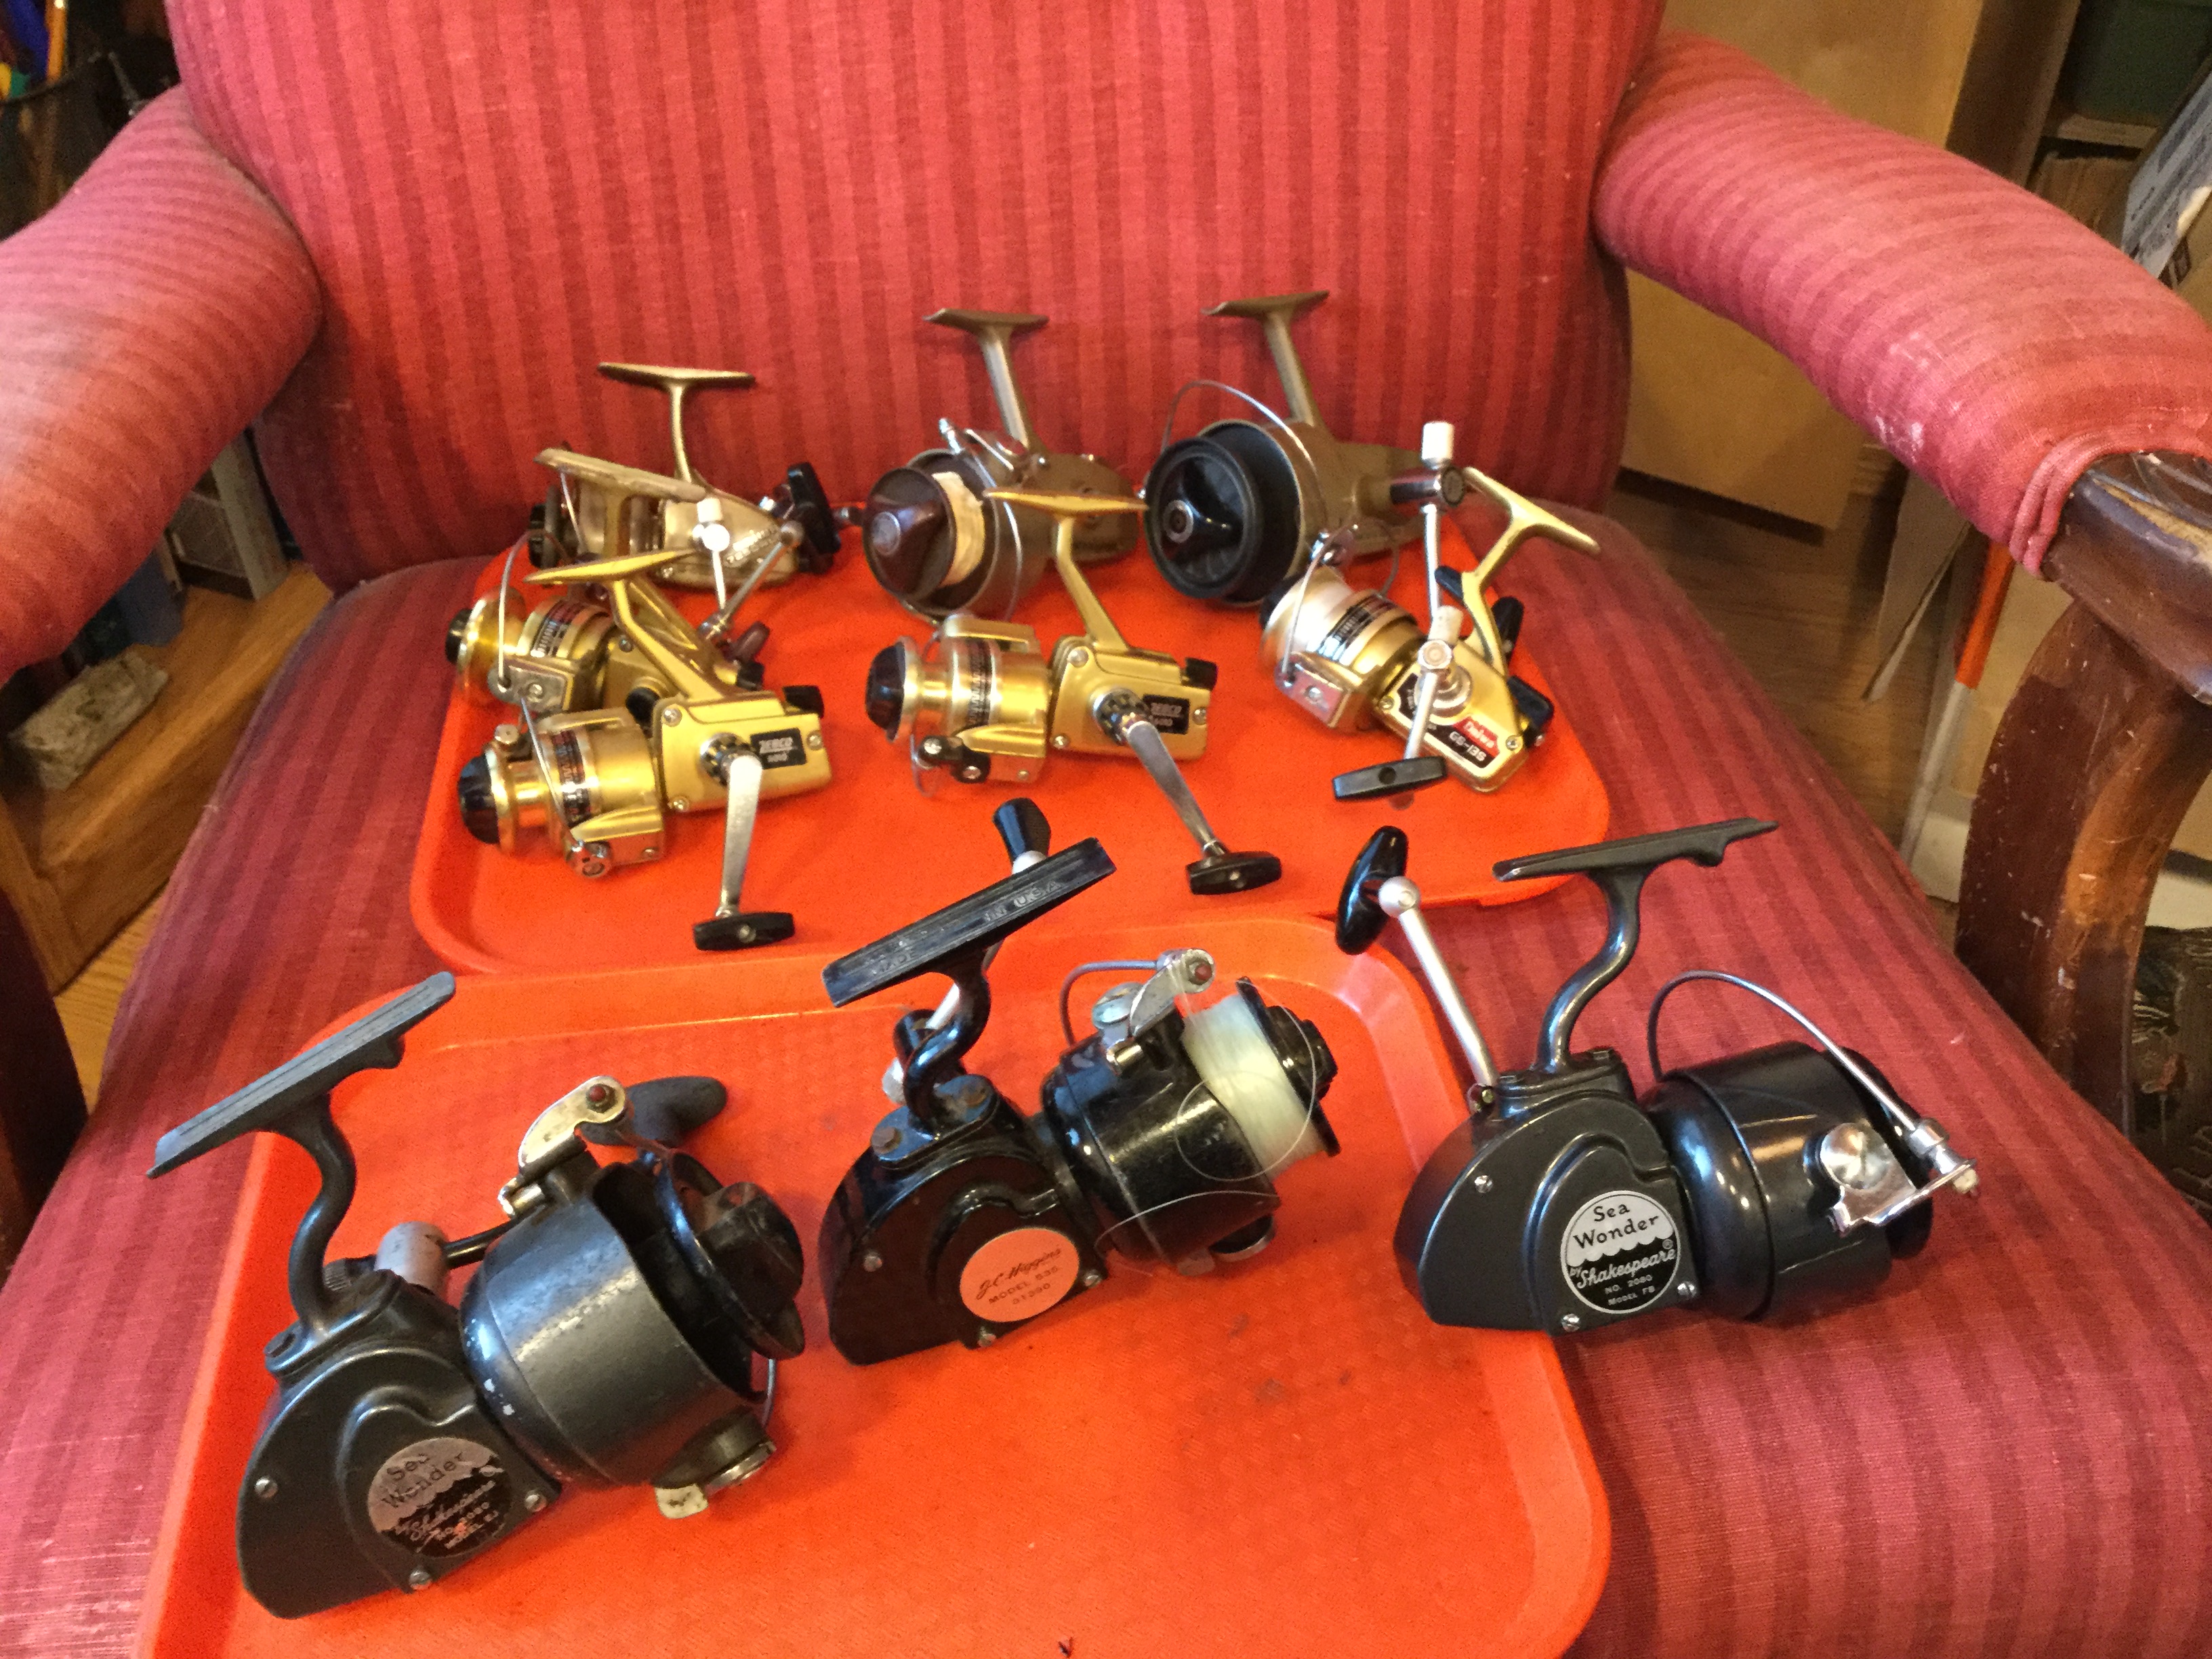 Shakespeare spinning reels from the '70s..